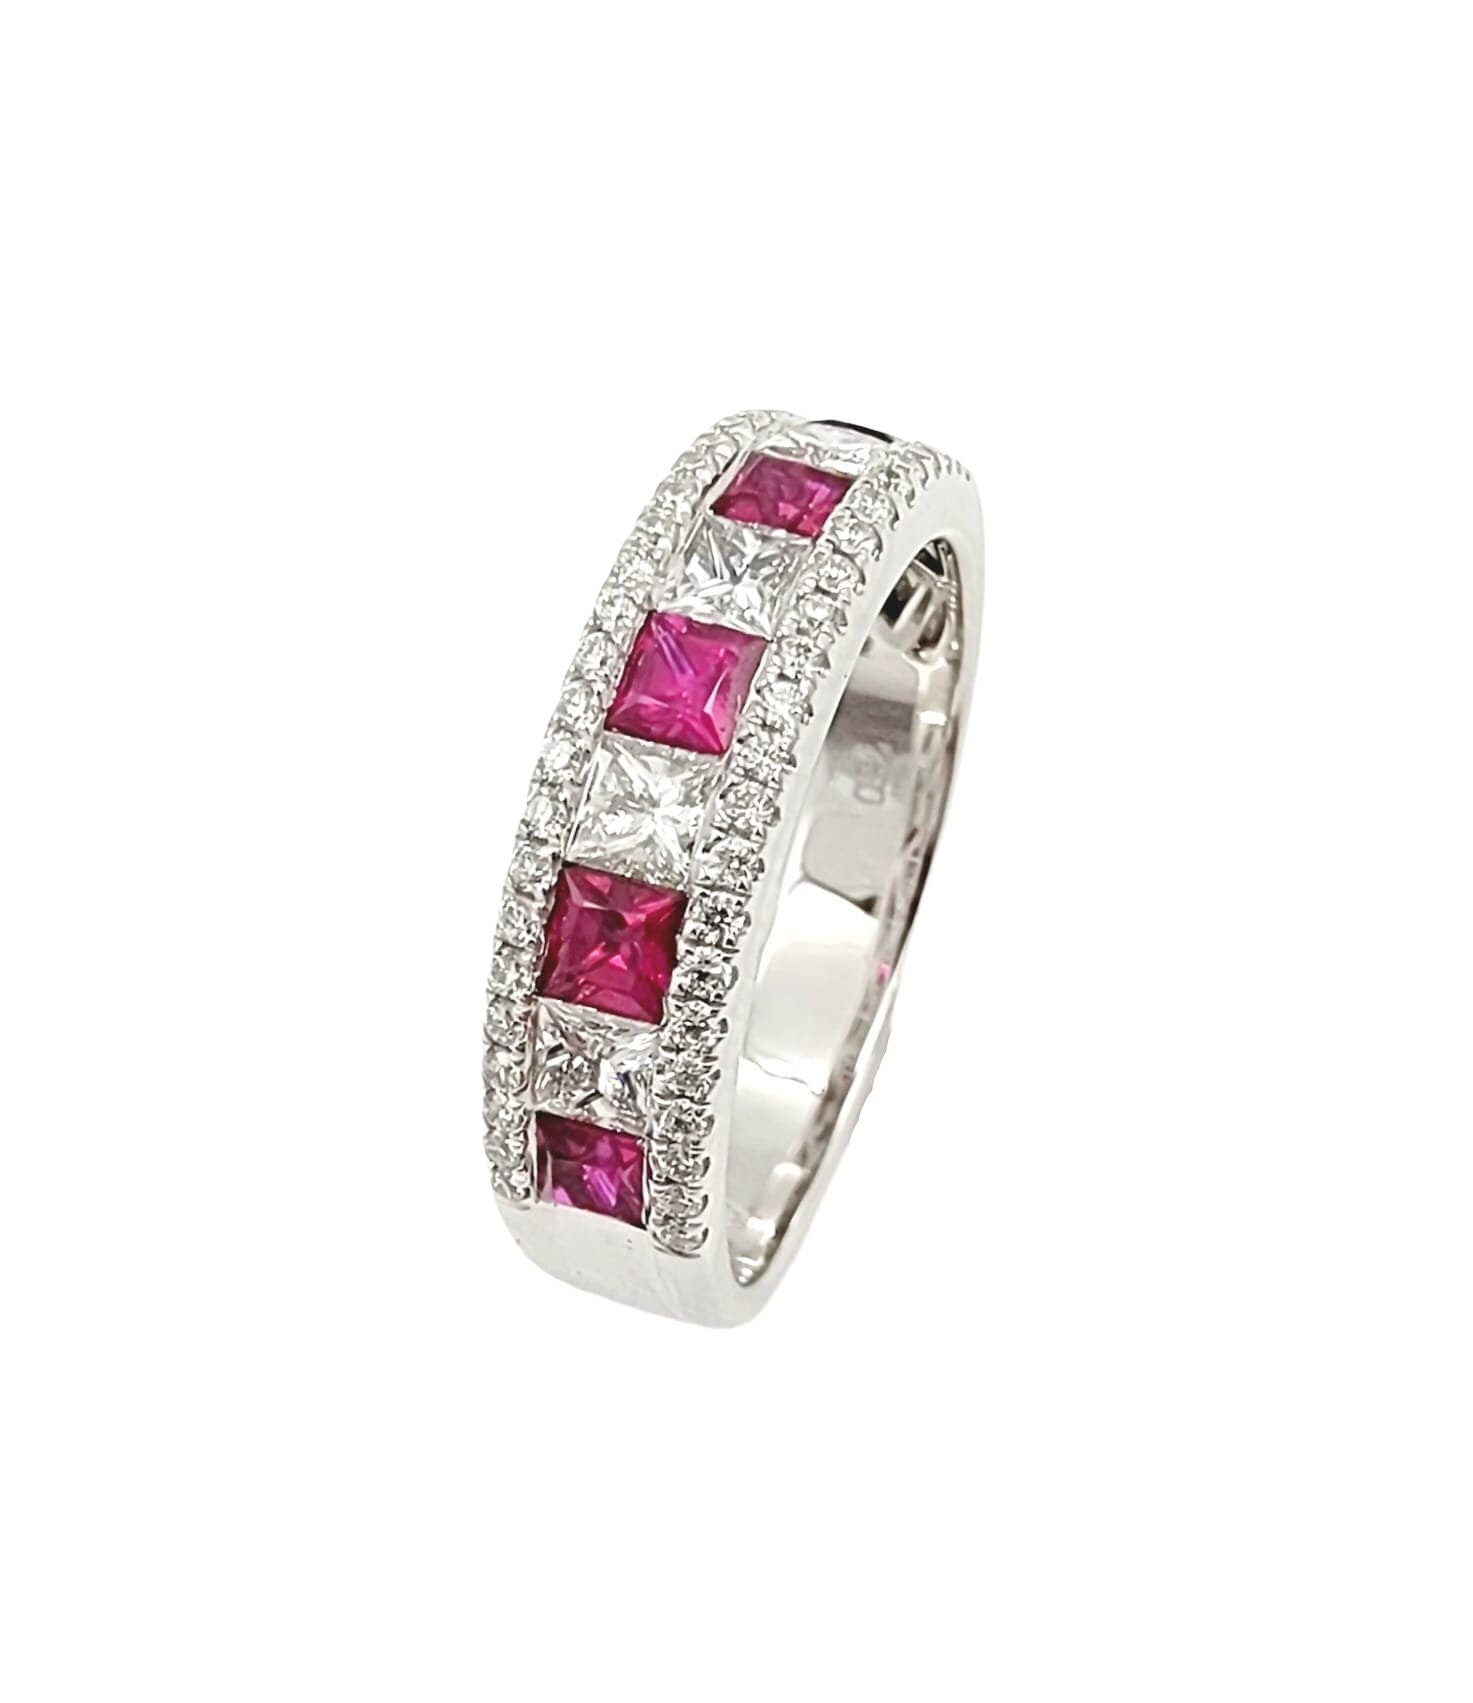 18k white gold Diamond and Ruby Ring, Gift for Her Christmas Ring Jewelry